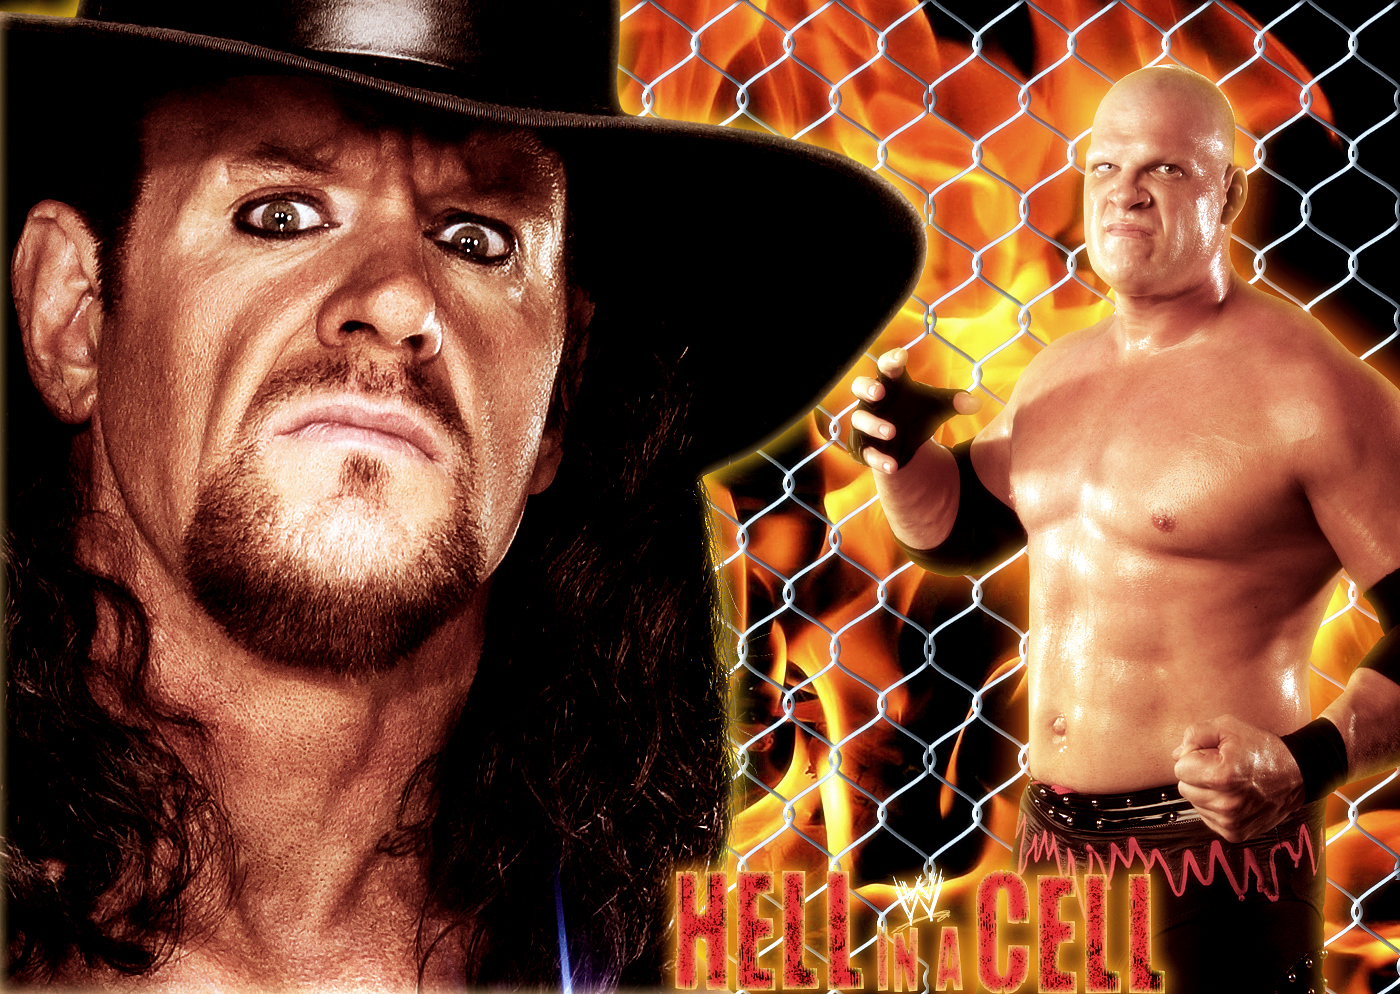 WWE Hell In a Cell wallpaper by Gogeta126 on DeviantArt